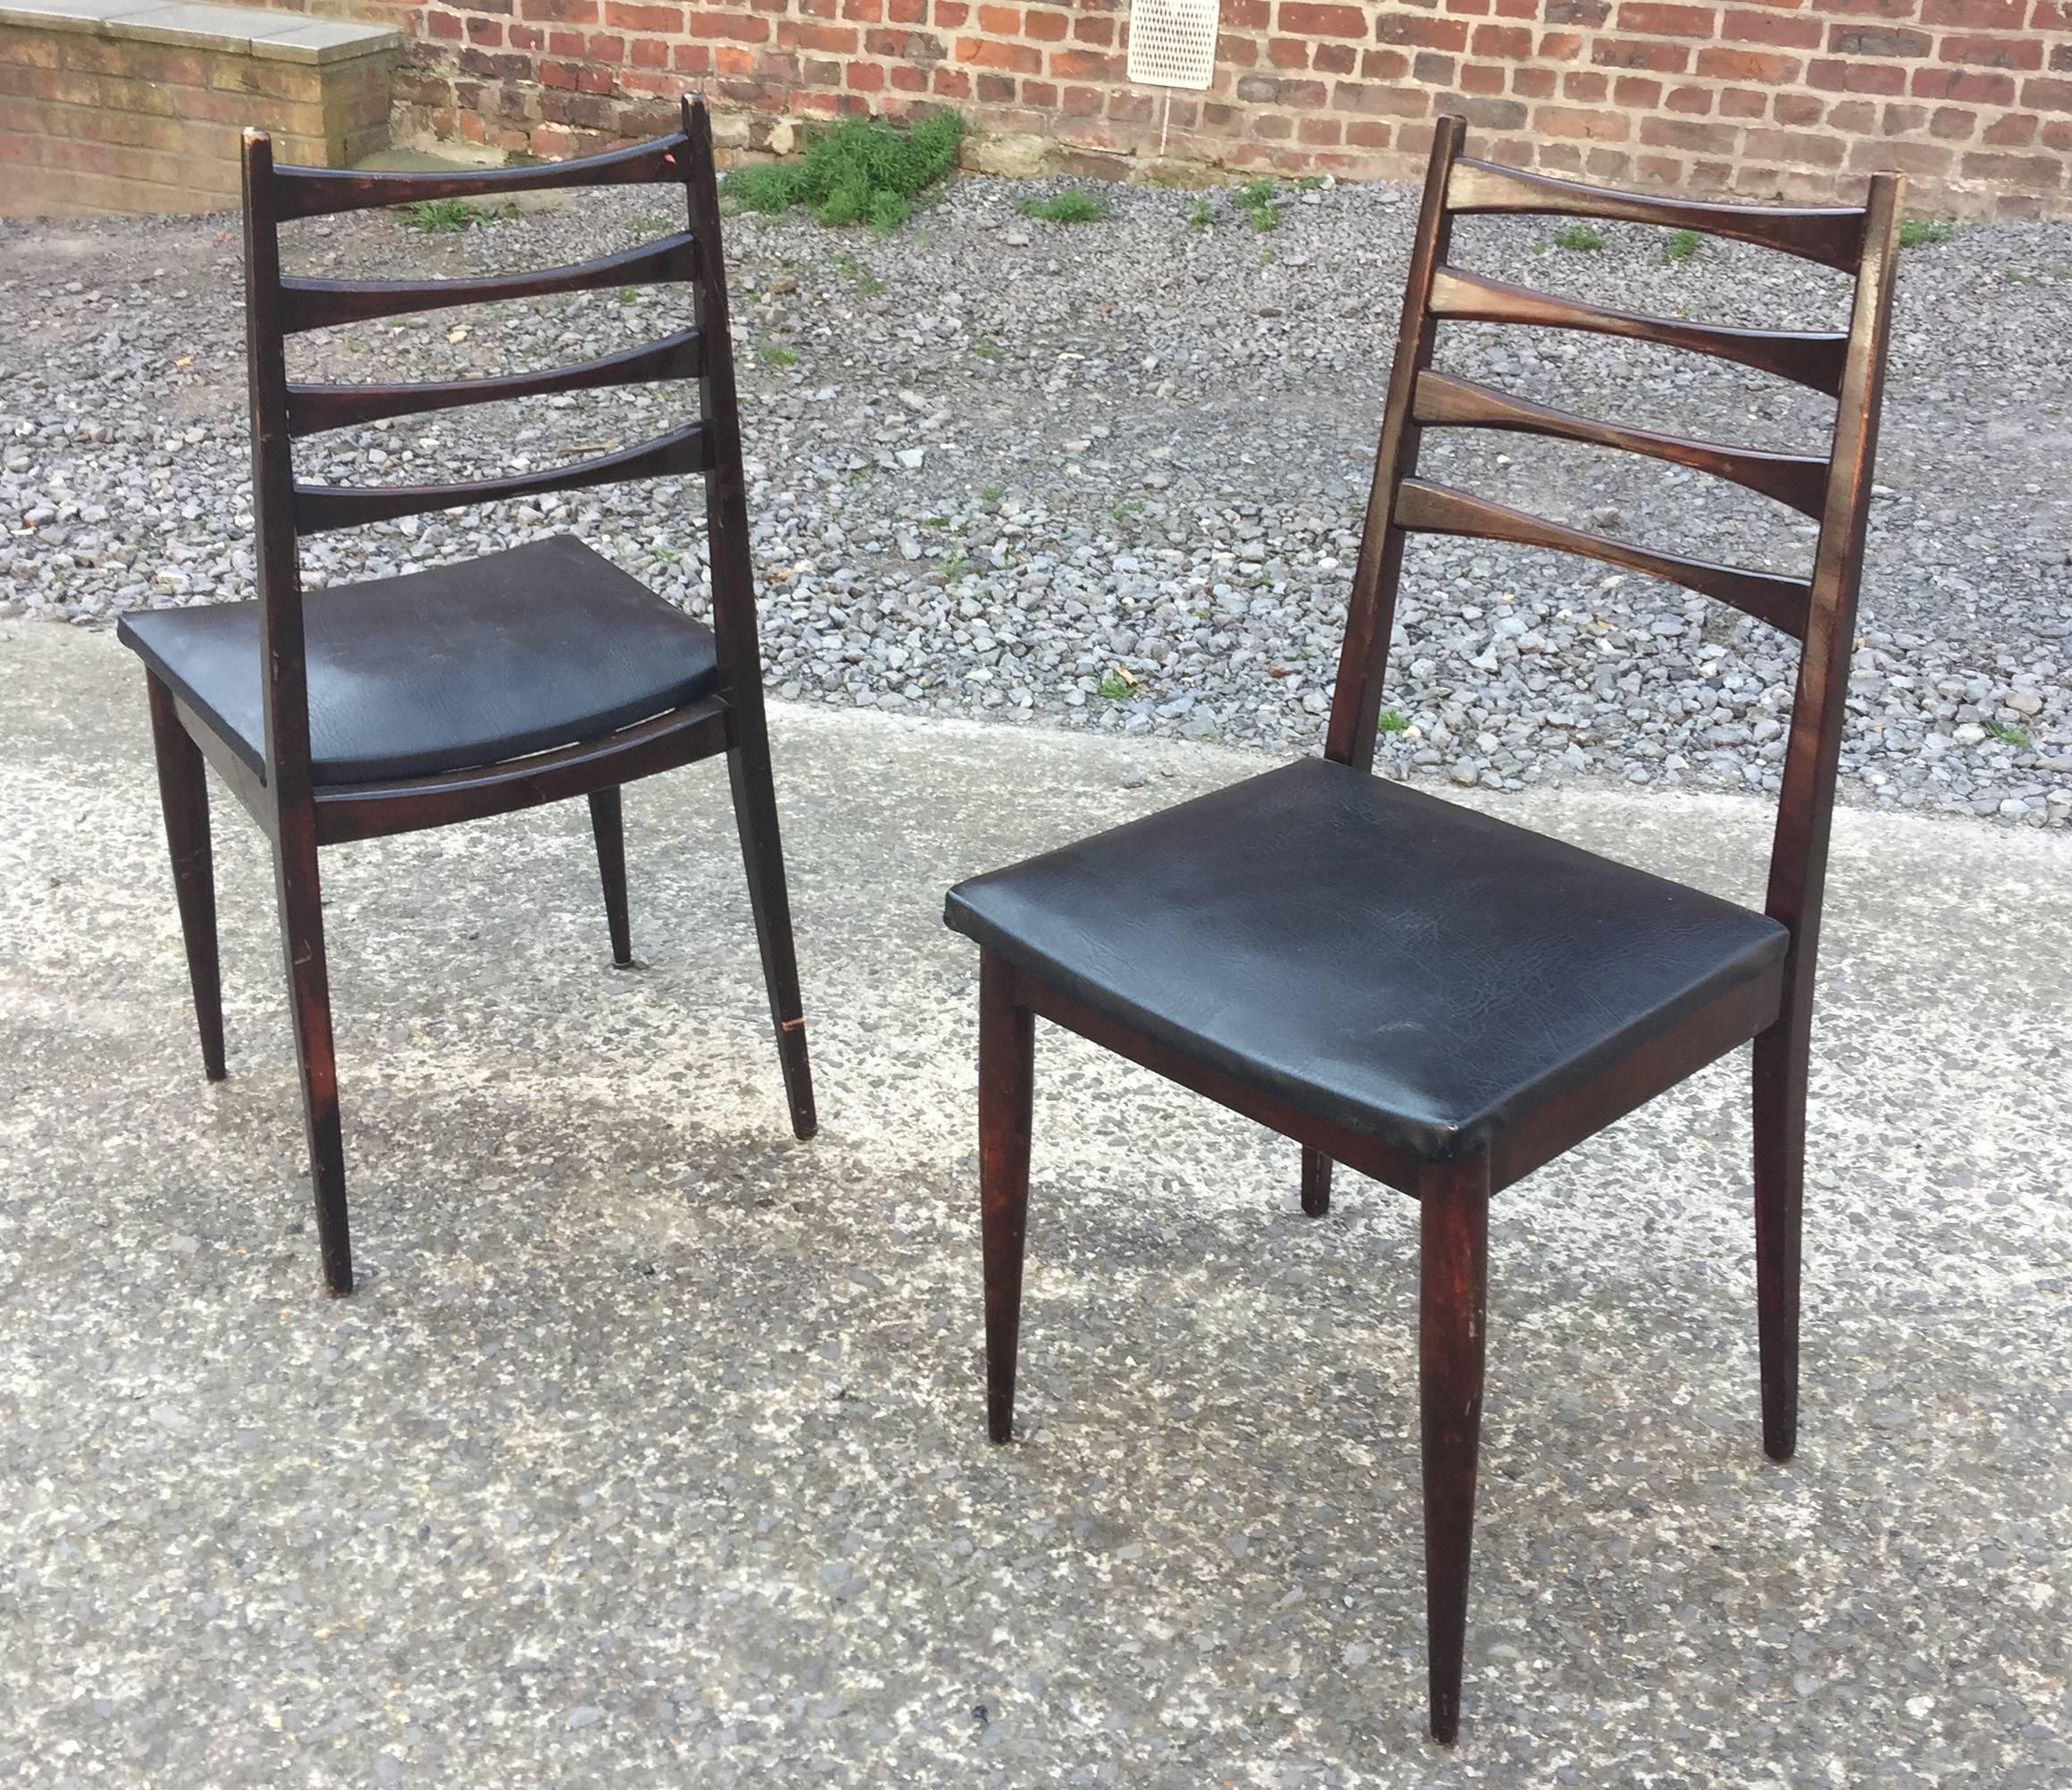 A suite of 6 Scandinavian style chairs, circa 1960.